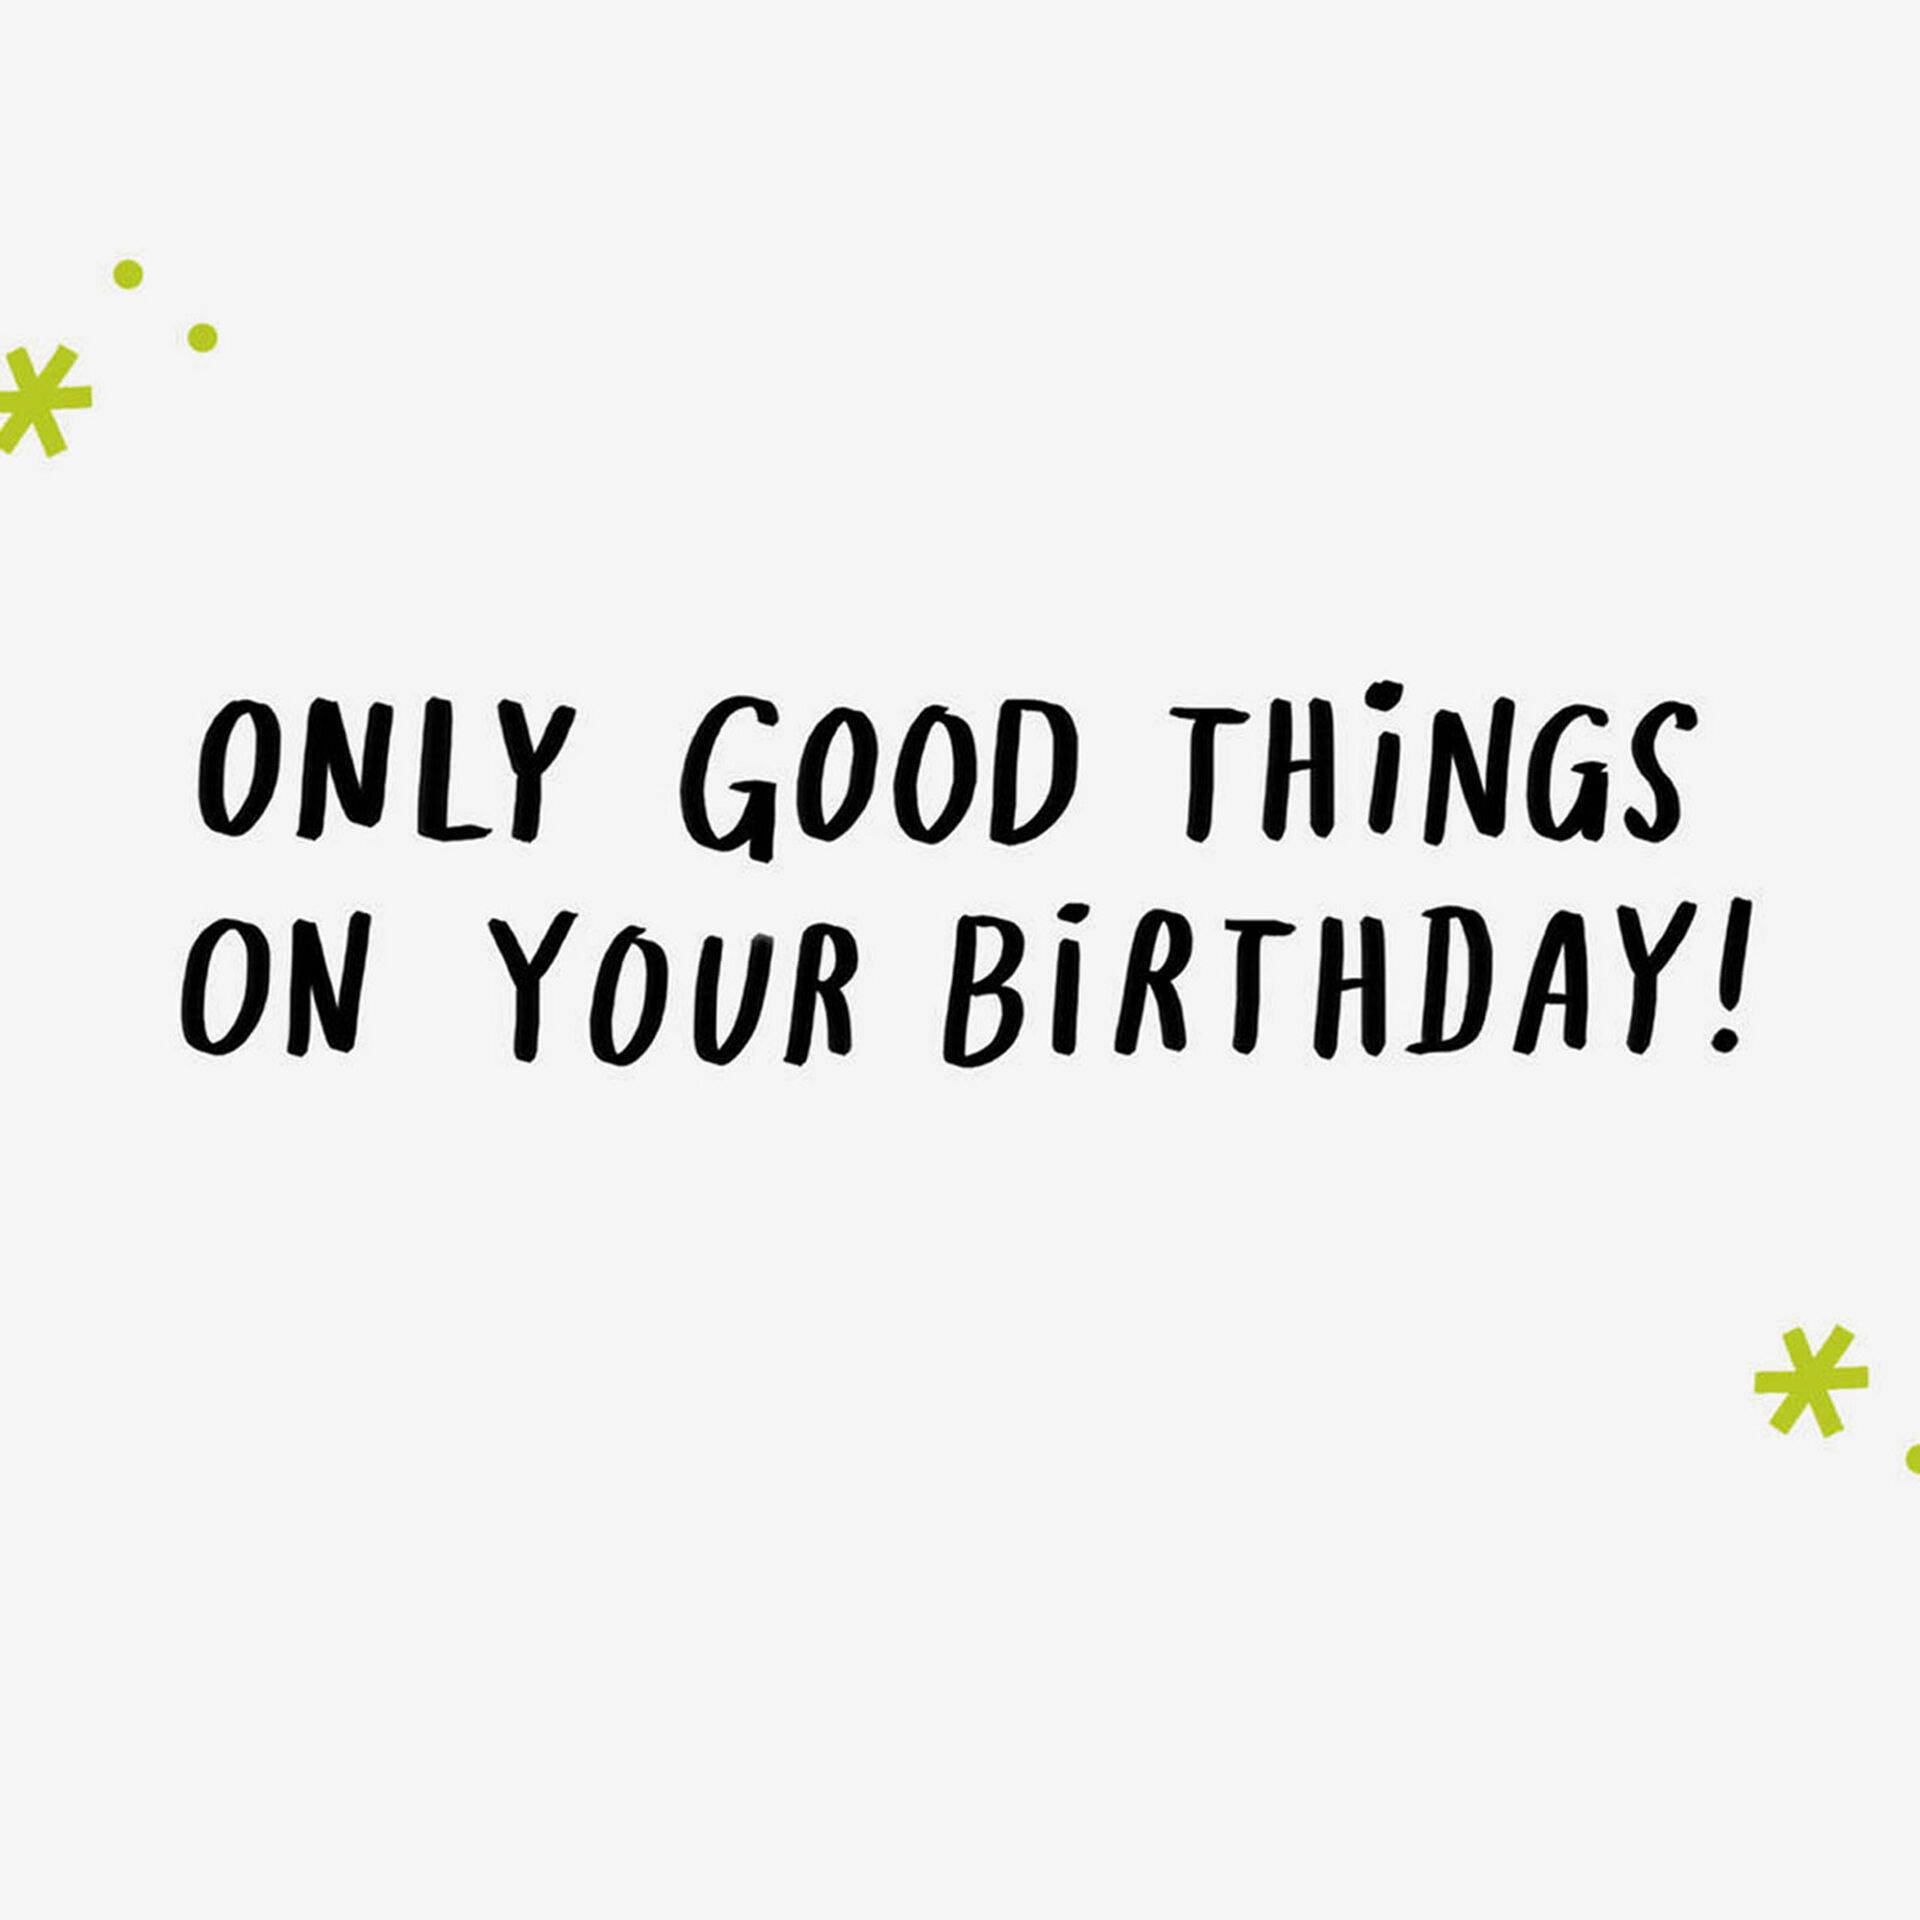 List-of-Things-to-Avoid-Funny-Birthday-Card_399ZZB9865_02